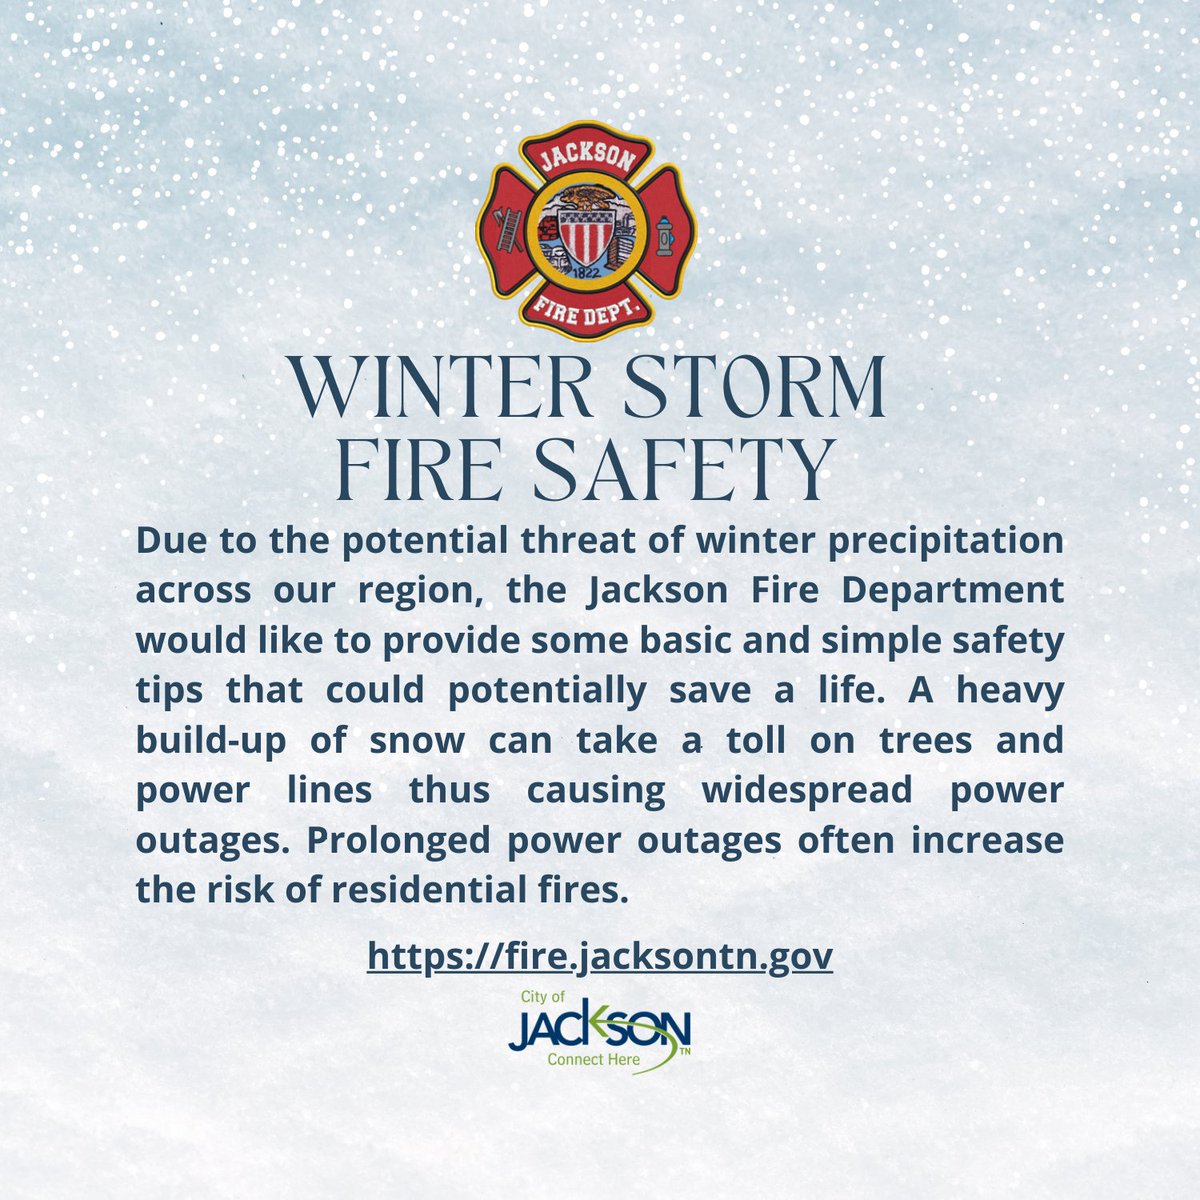 Due to the potential threat of winter precipitation across our region, the Jackson Fire Department would like to provide some basic and simple safety tips that could potentially save a life. Visit the Fire Prevention and Education Page at fire.jacksontn.gov to read more.